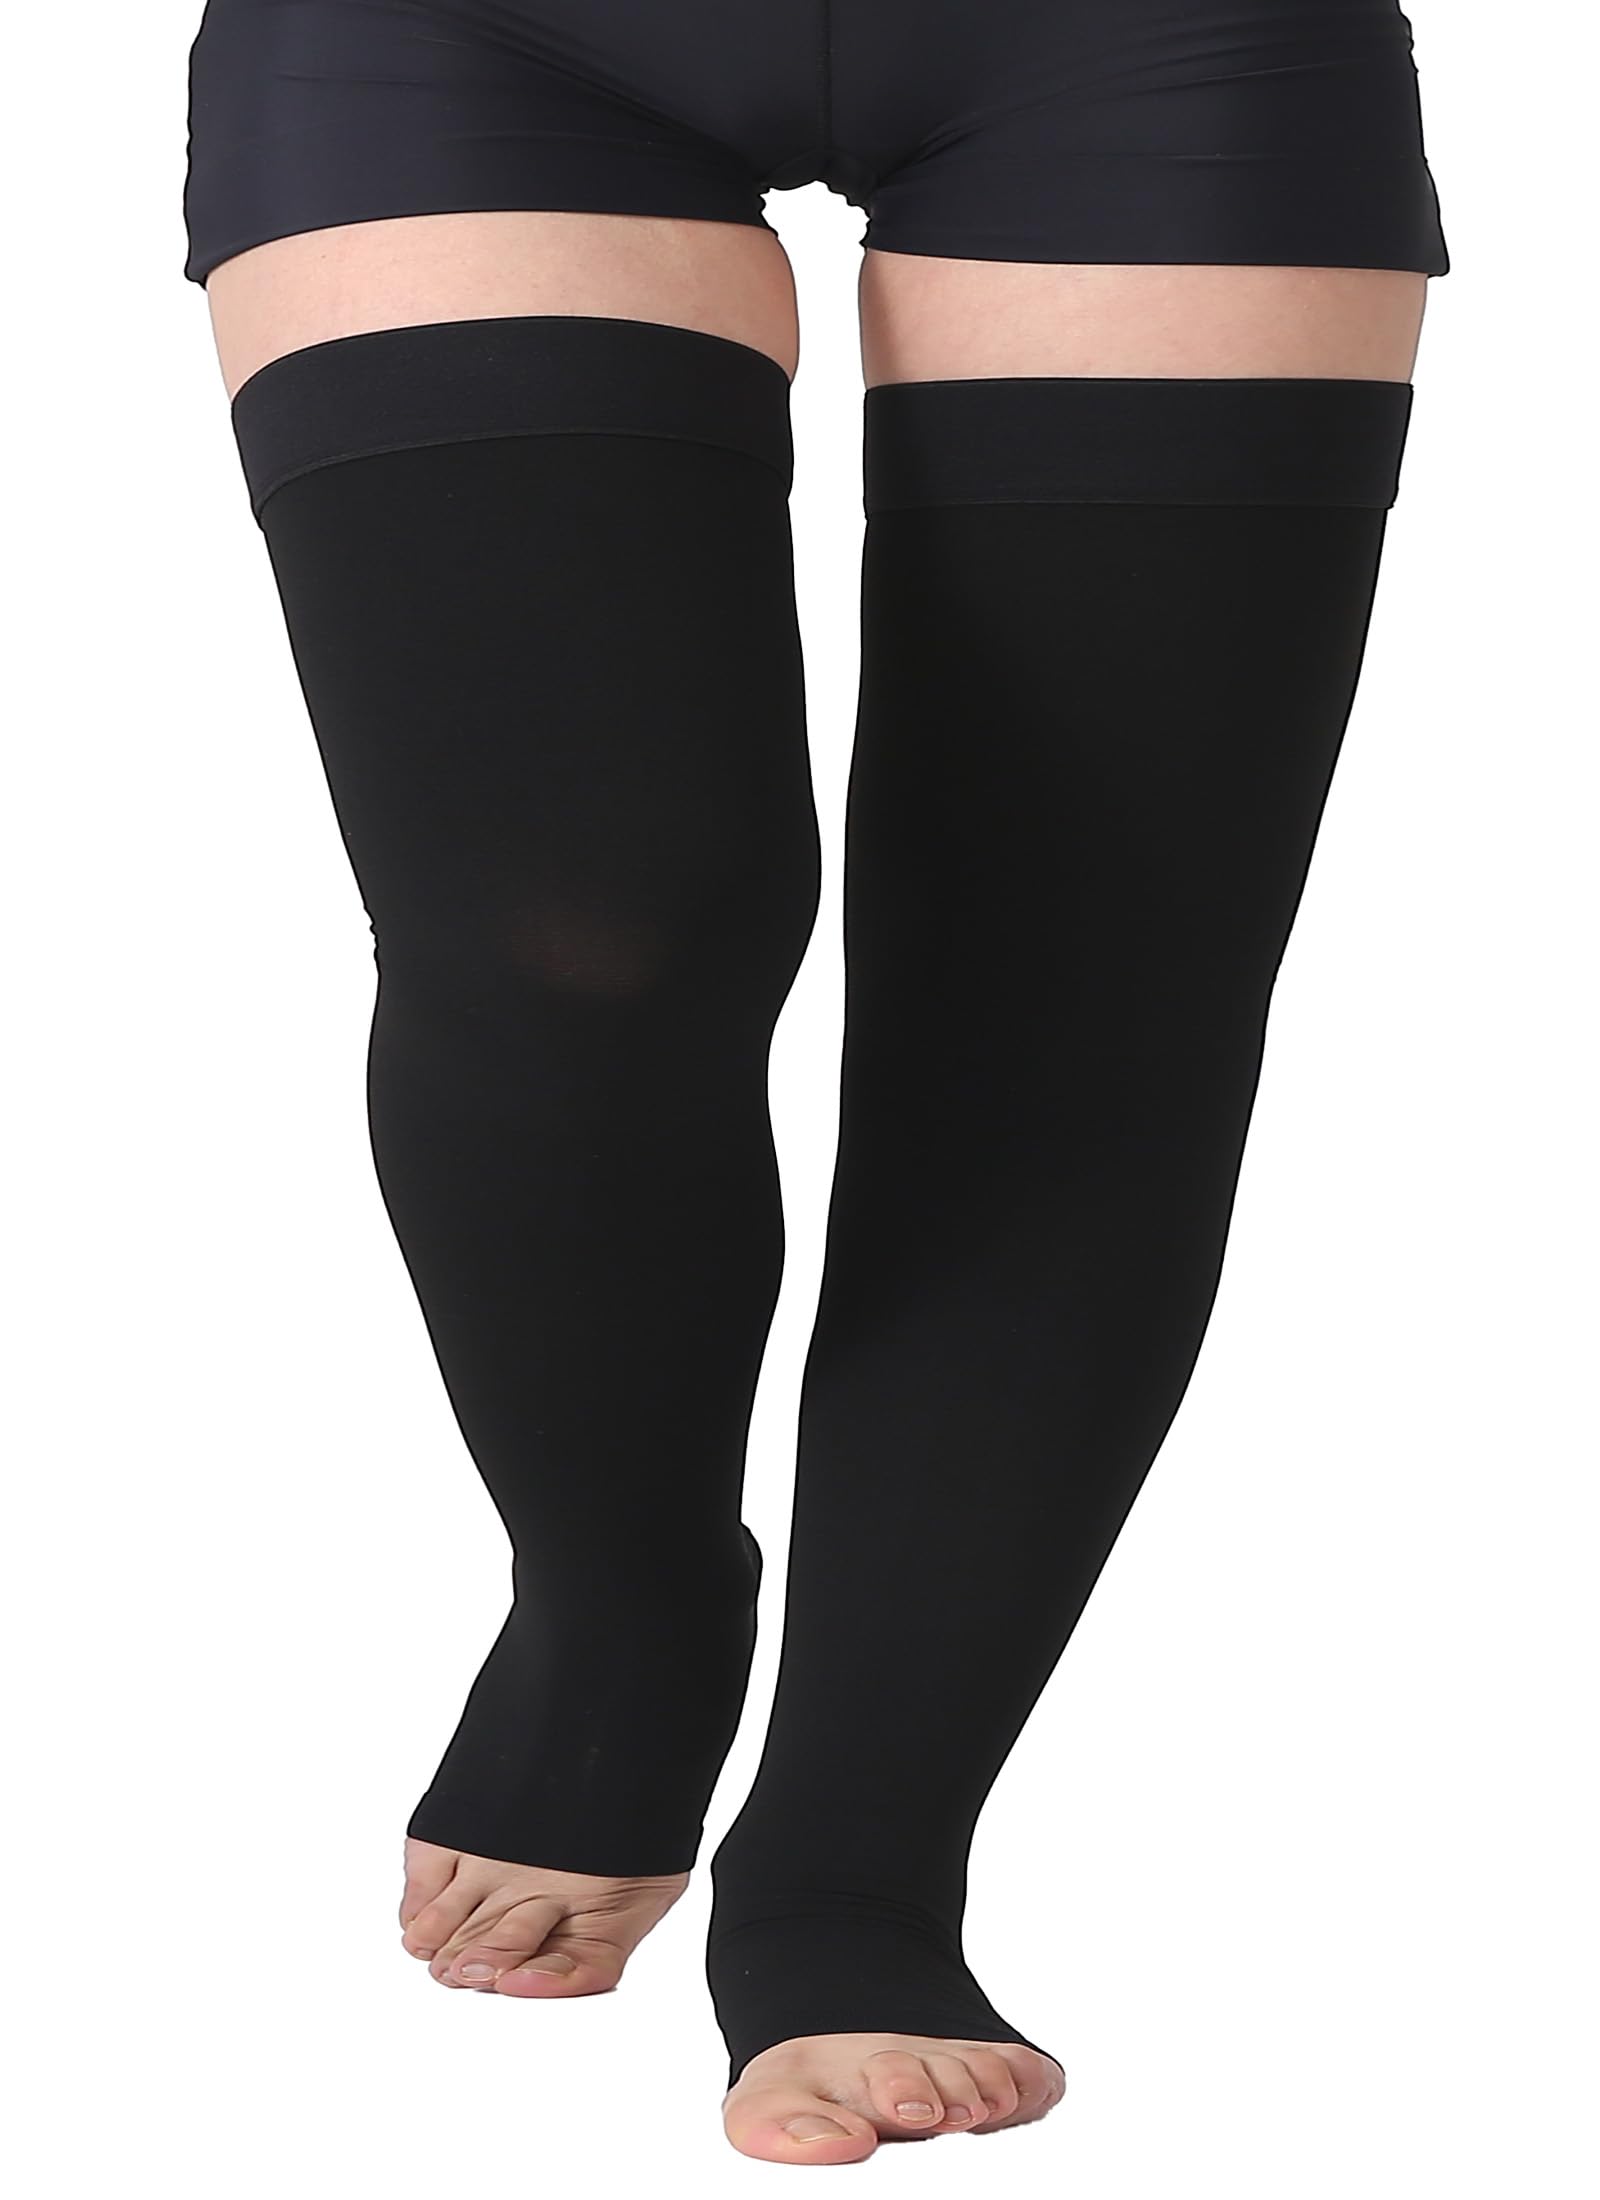 Medical Compression Tights for Women 20-30mmHg Opaque Compression